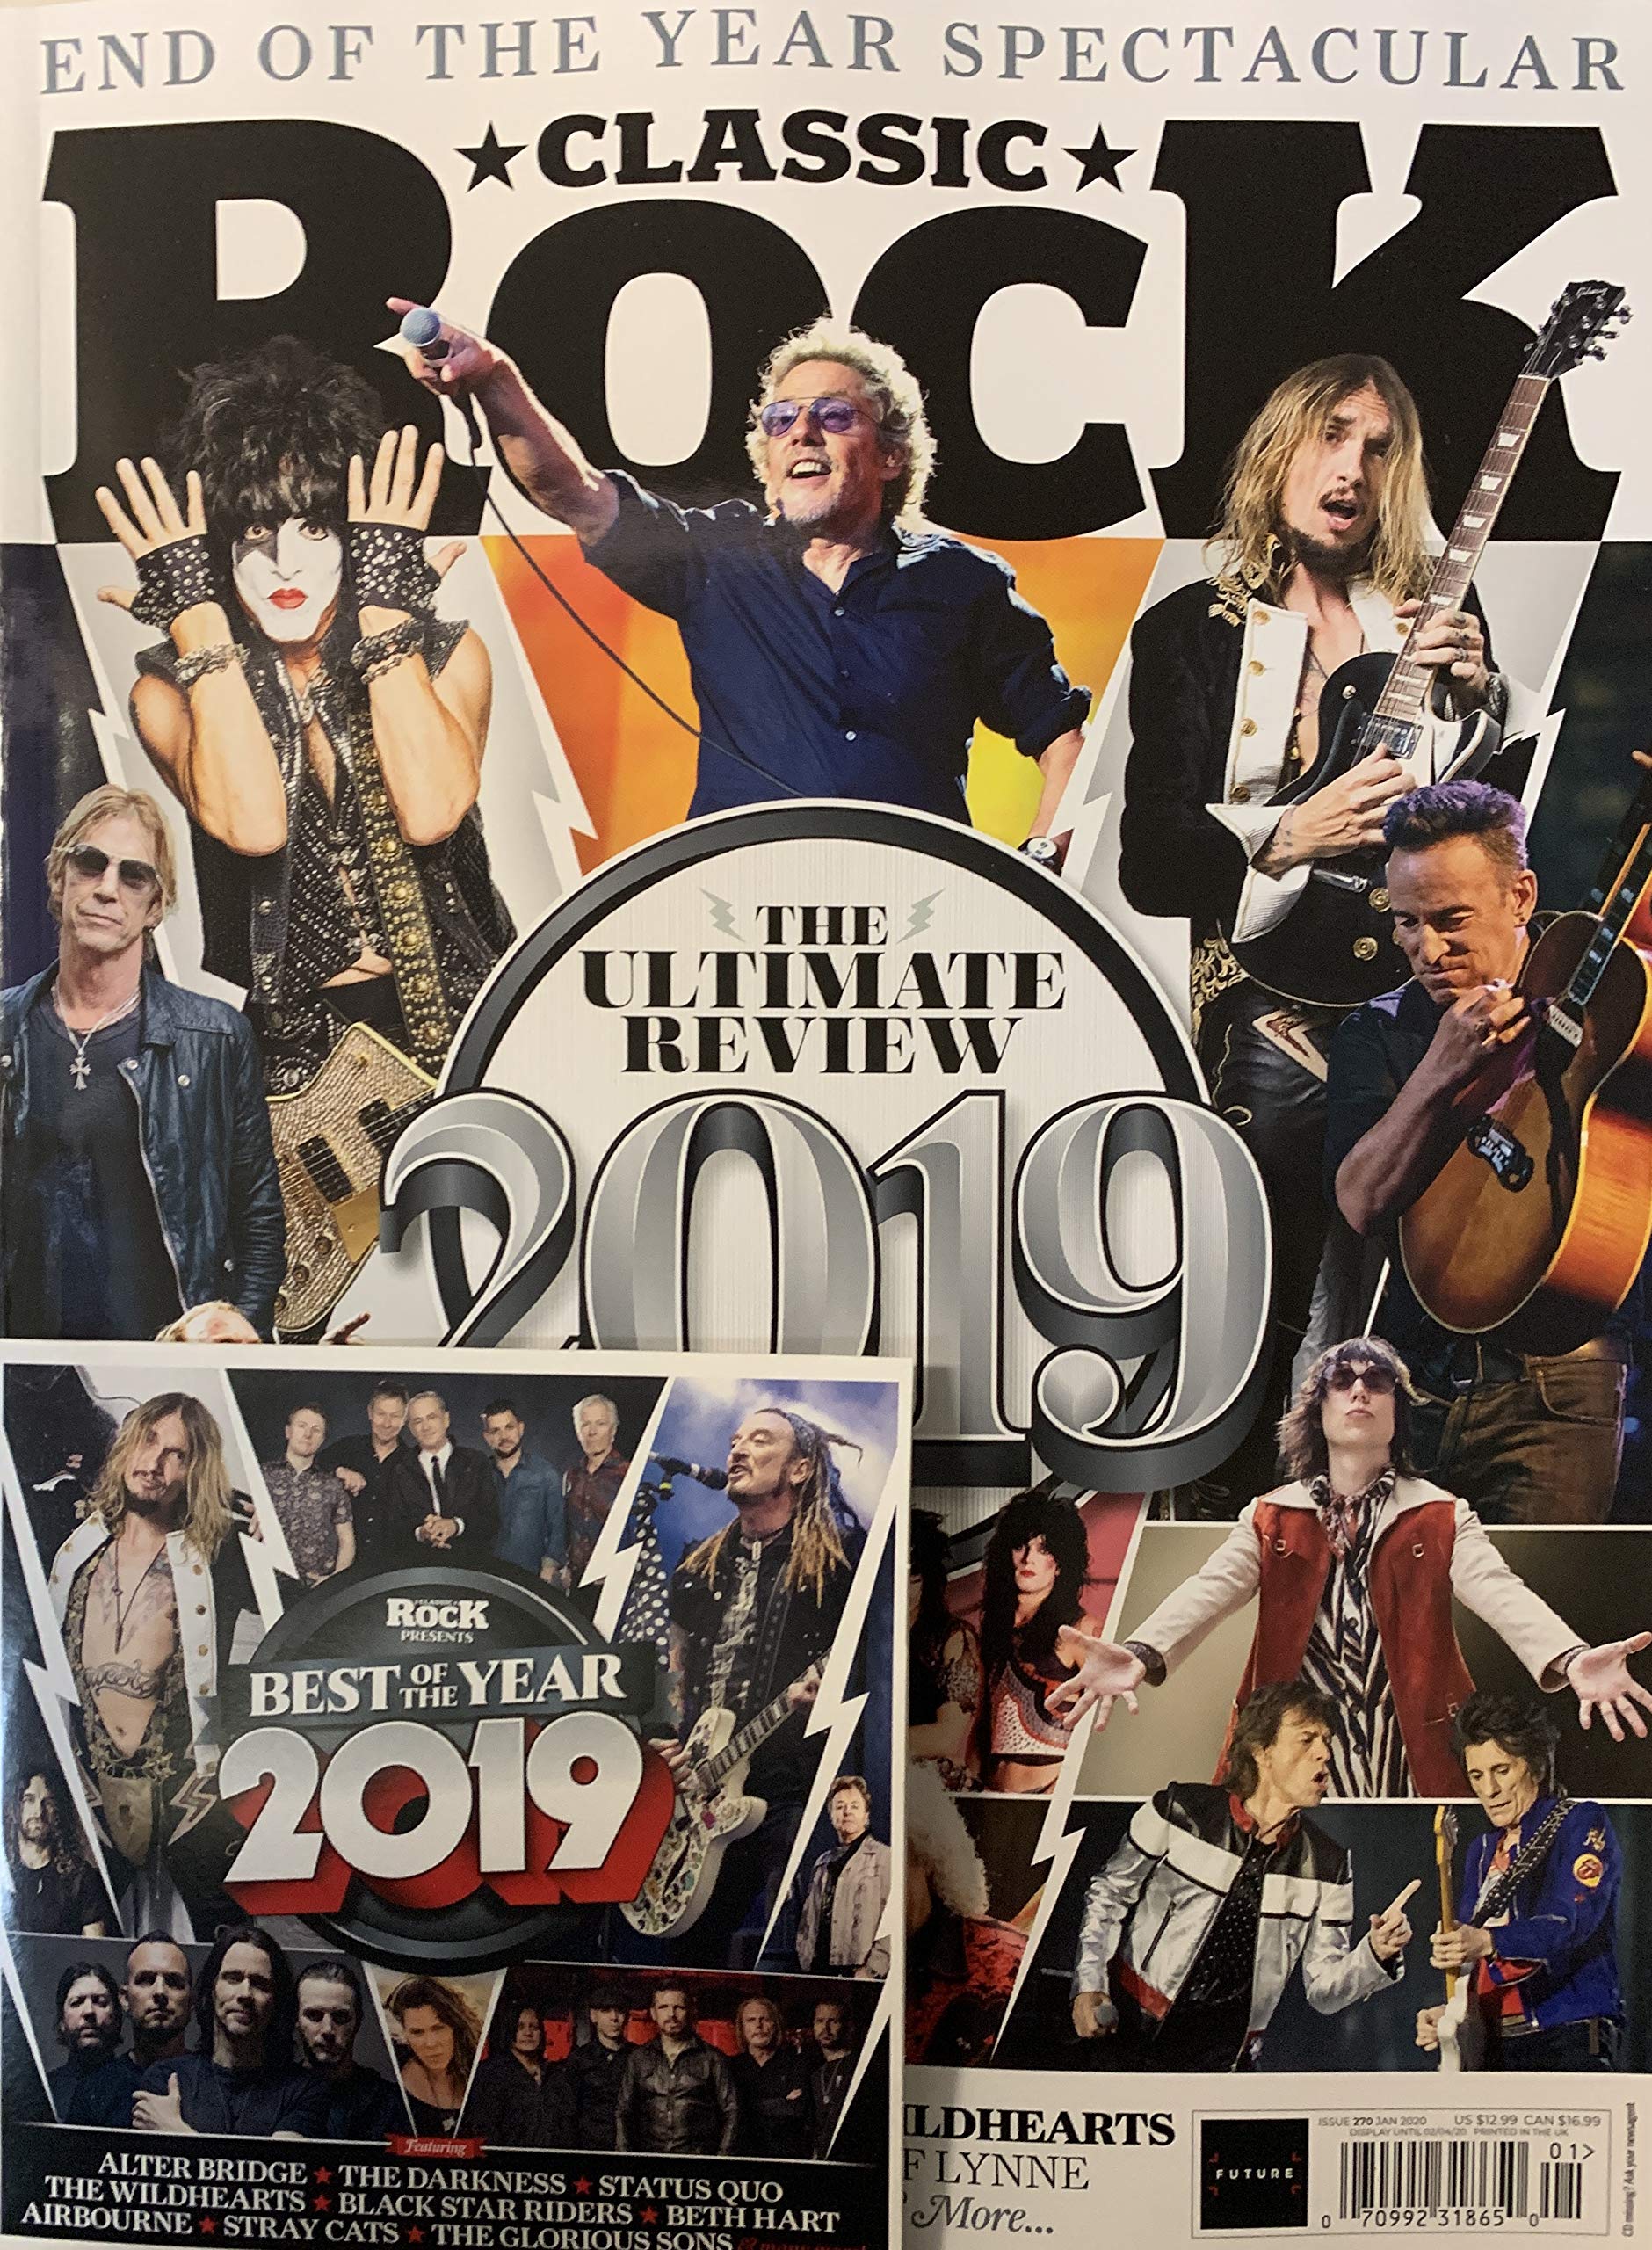 Classic Rock Issue 270 (January 2020) - 2019: The Ultimate Review